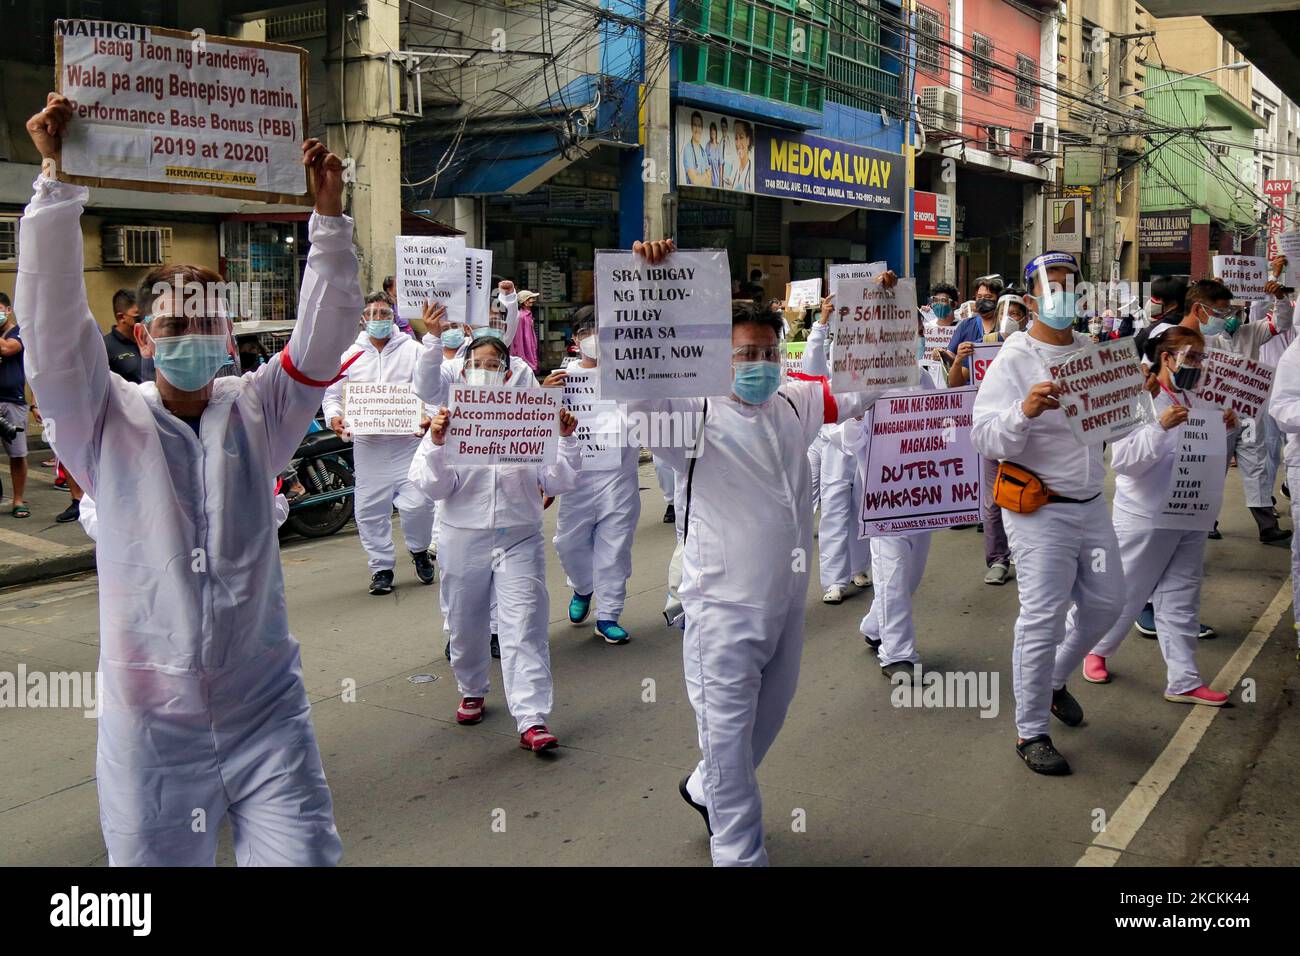 Health workers march towards the Department of Health (DOH) headquarters in Manila, Philippines on September 1, 2021. Several workers from different hospitals trooped to the gates of the facility to condemn health secretary Francisco Duque III and called for his resignation for the department’s alleged misuse of COVID19 funds during the pandemic. (Photo by George Calvelo/NurPhoto) Stock Photo